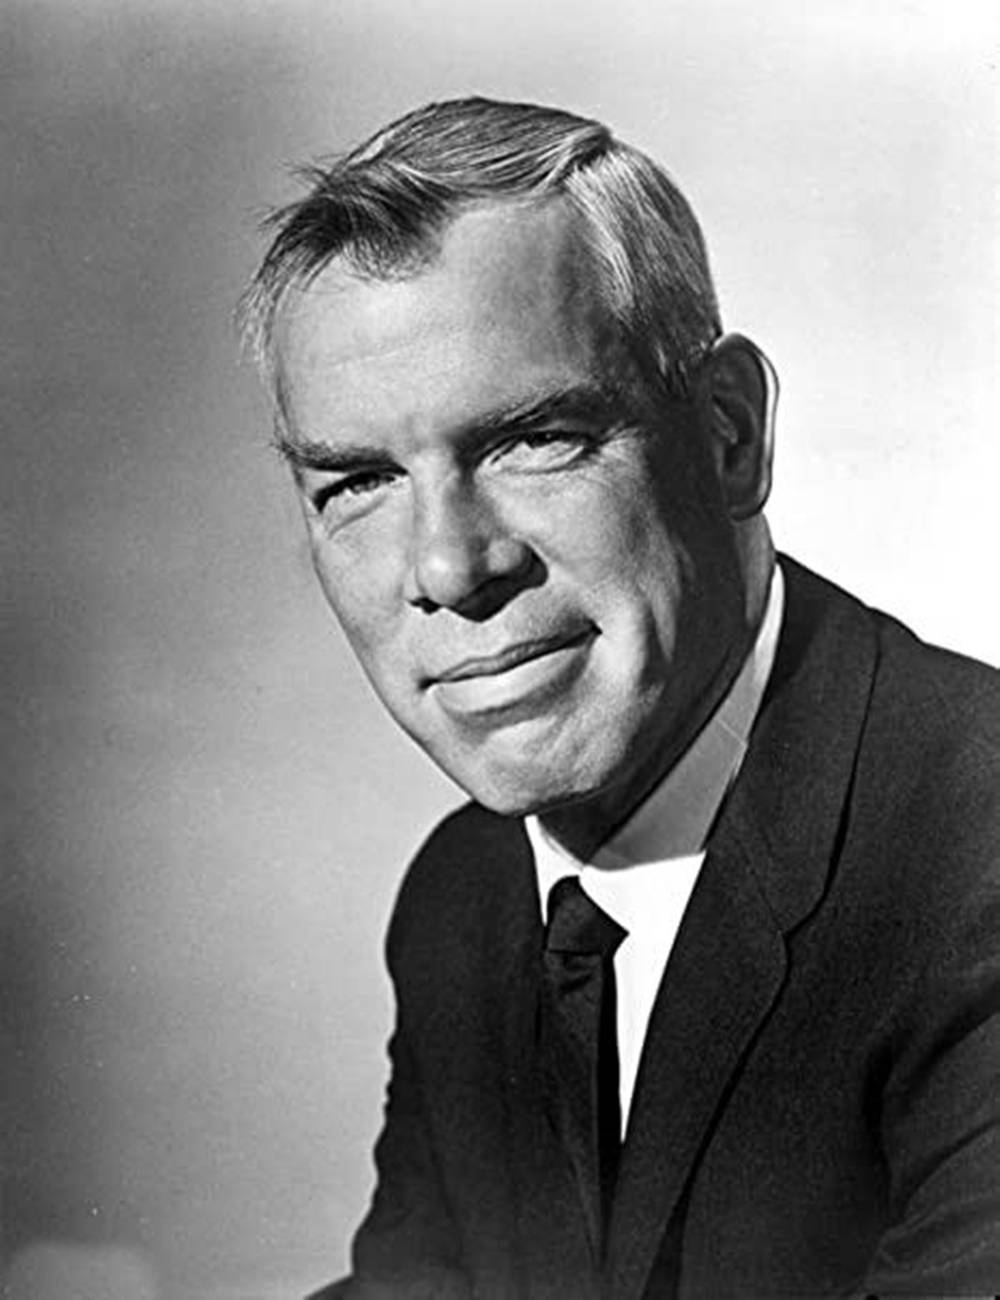 Free Lee Marvin Wallpaper Downloads, [100+] Lee Marvin Wallpapers for FREE  